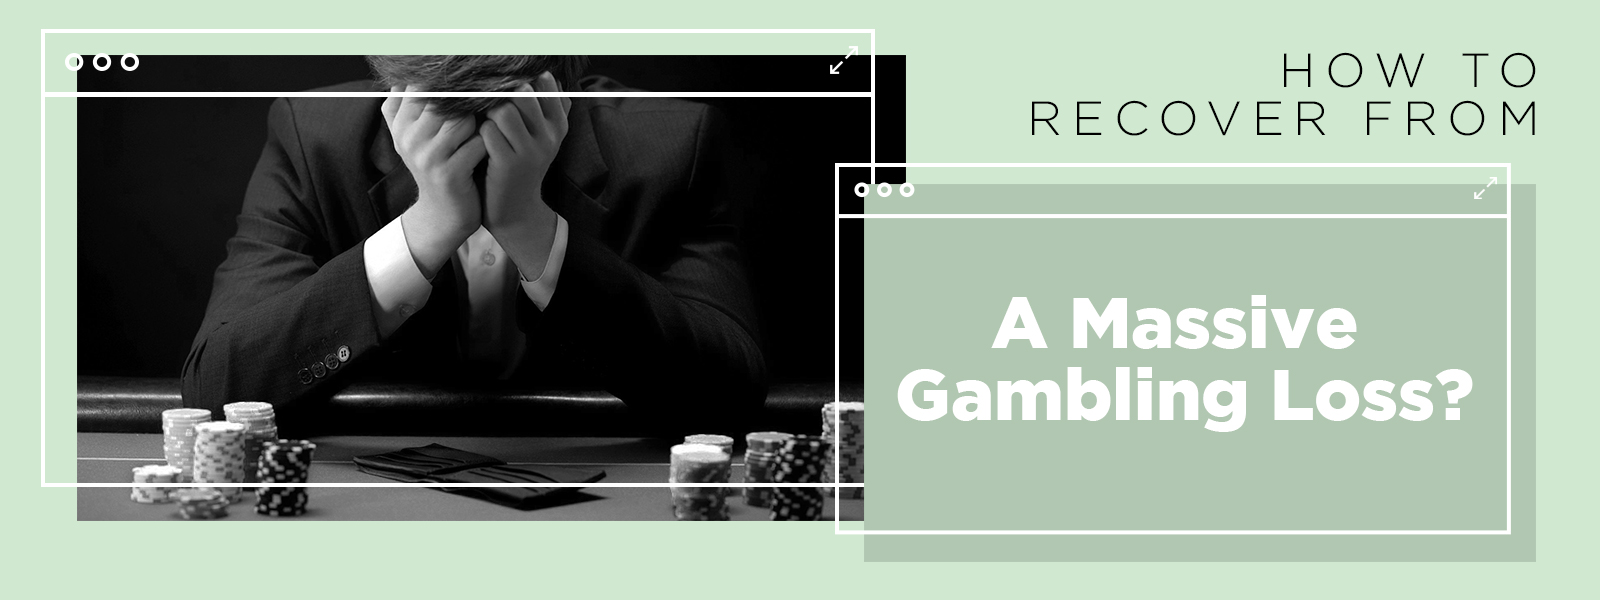 Tips To Recover From Massive Gambling Loss